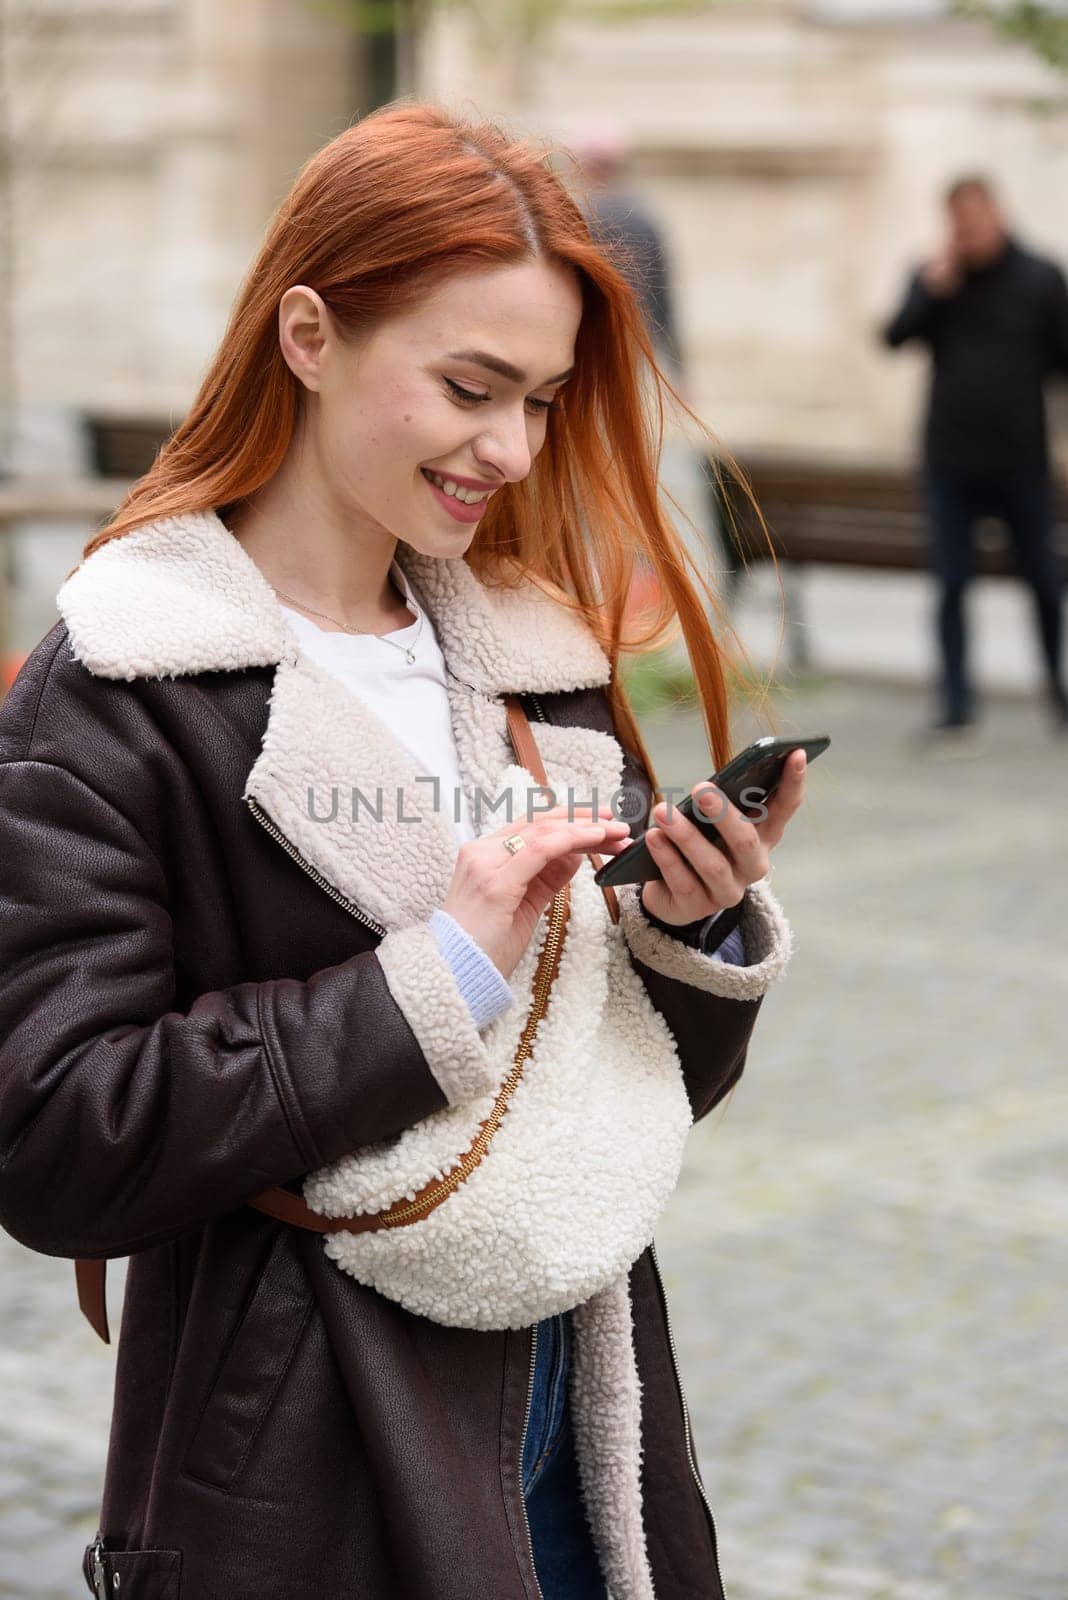 happy woman communicates with friends via video link outdoors on an old town street by Ashtray25